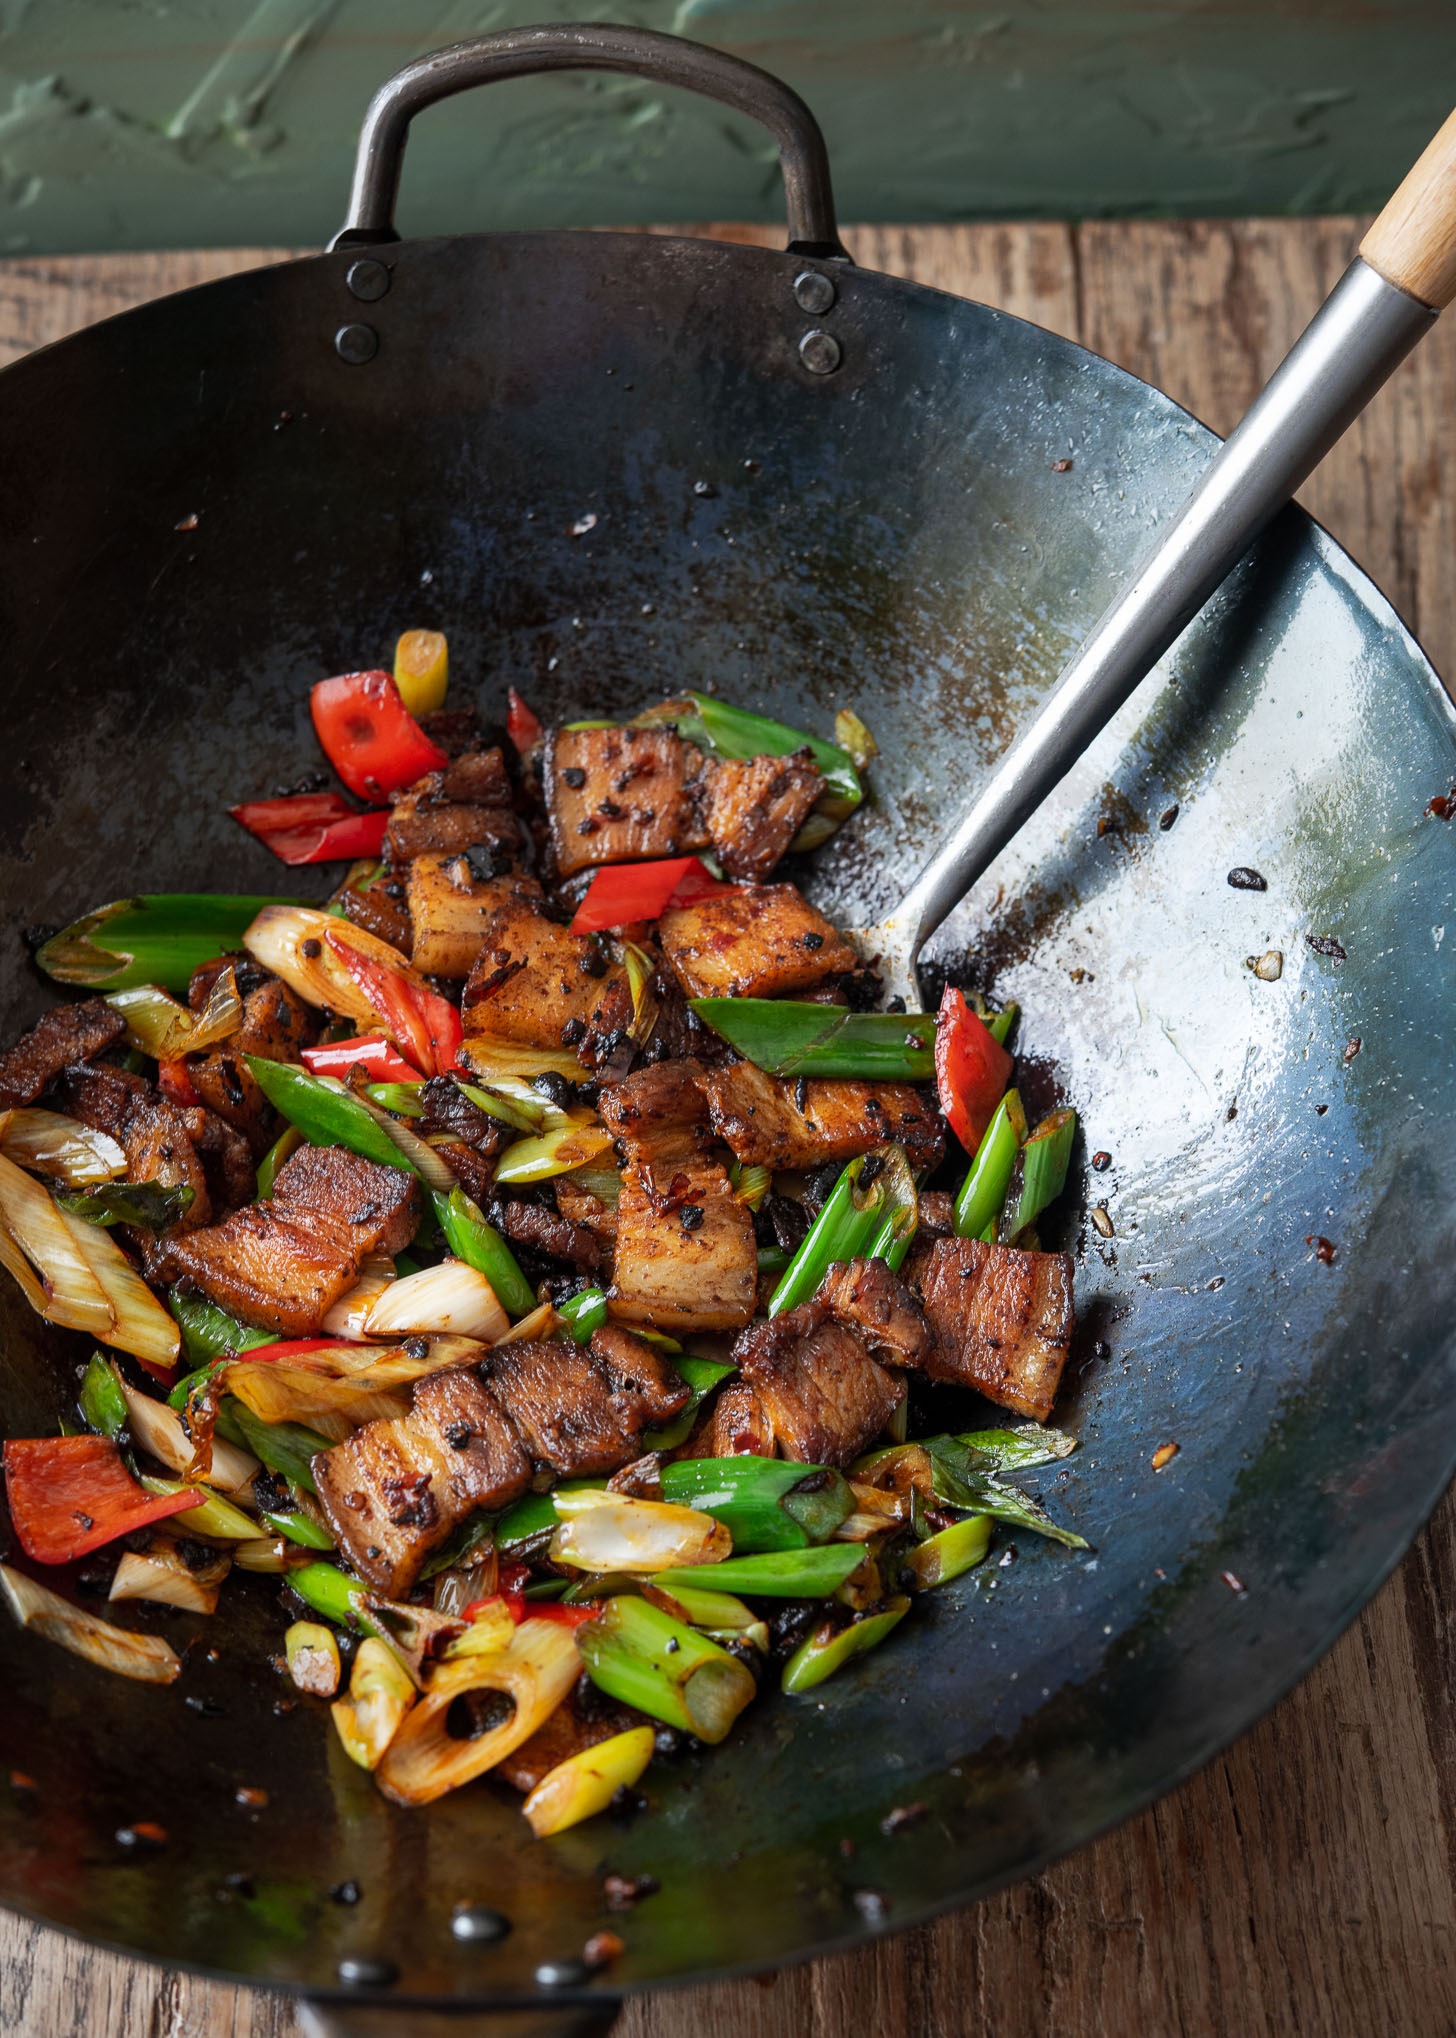 Twice cooked pork belly is prepared in a Chinese wok.